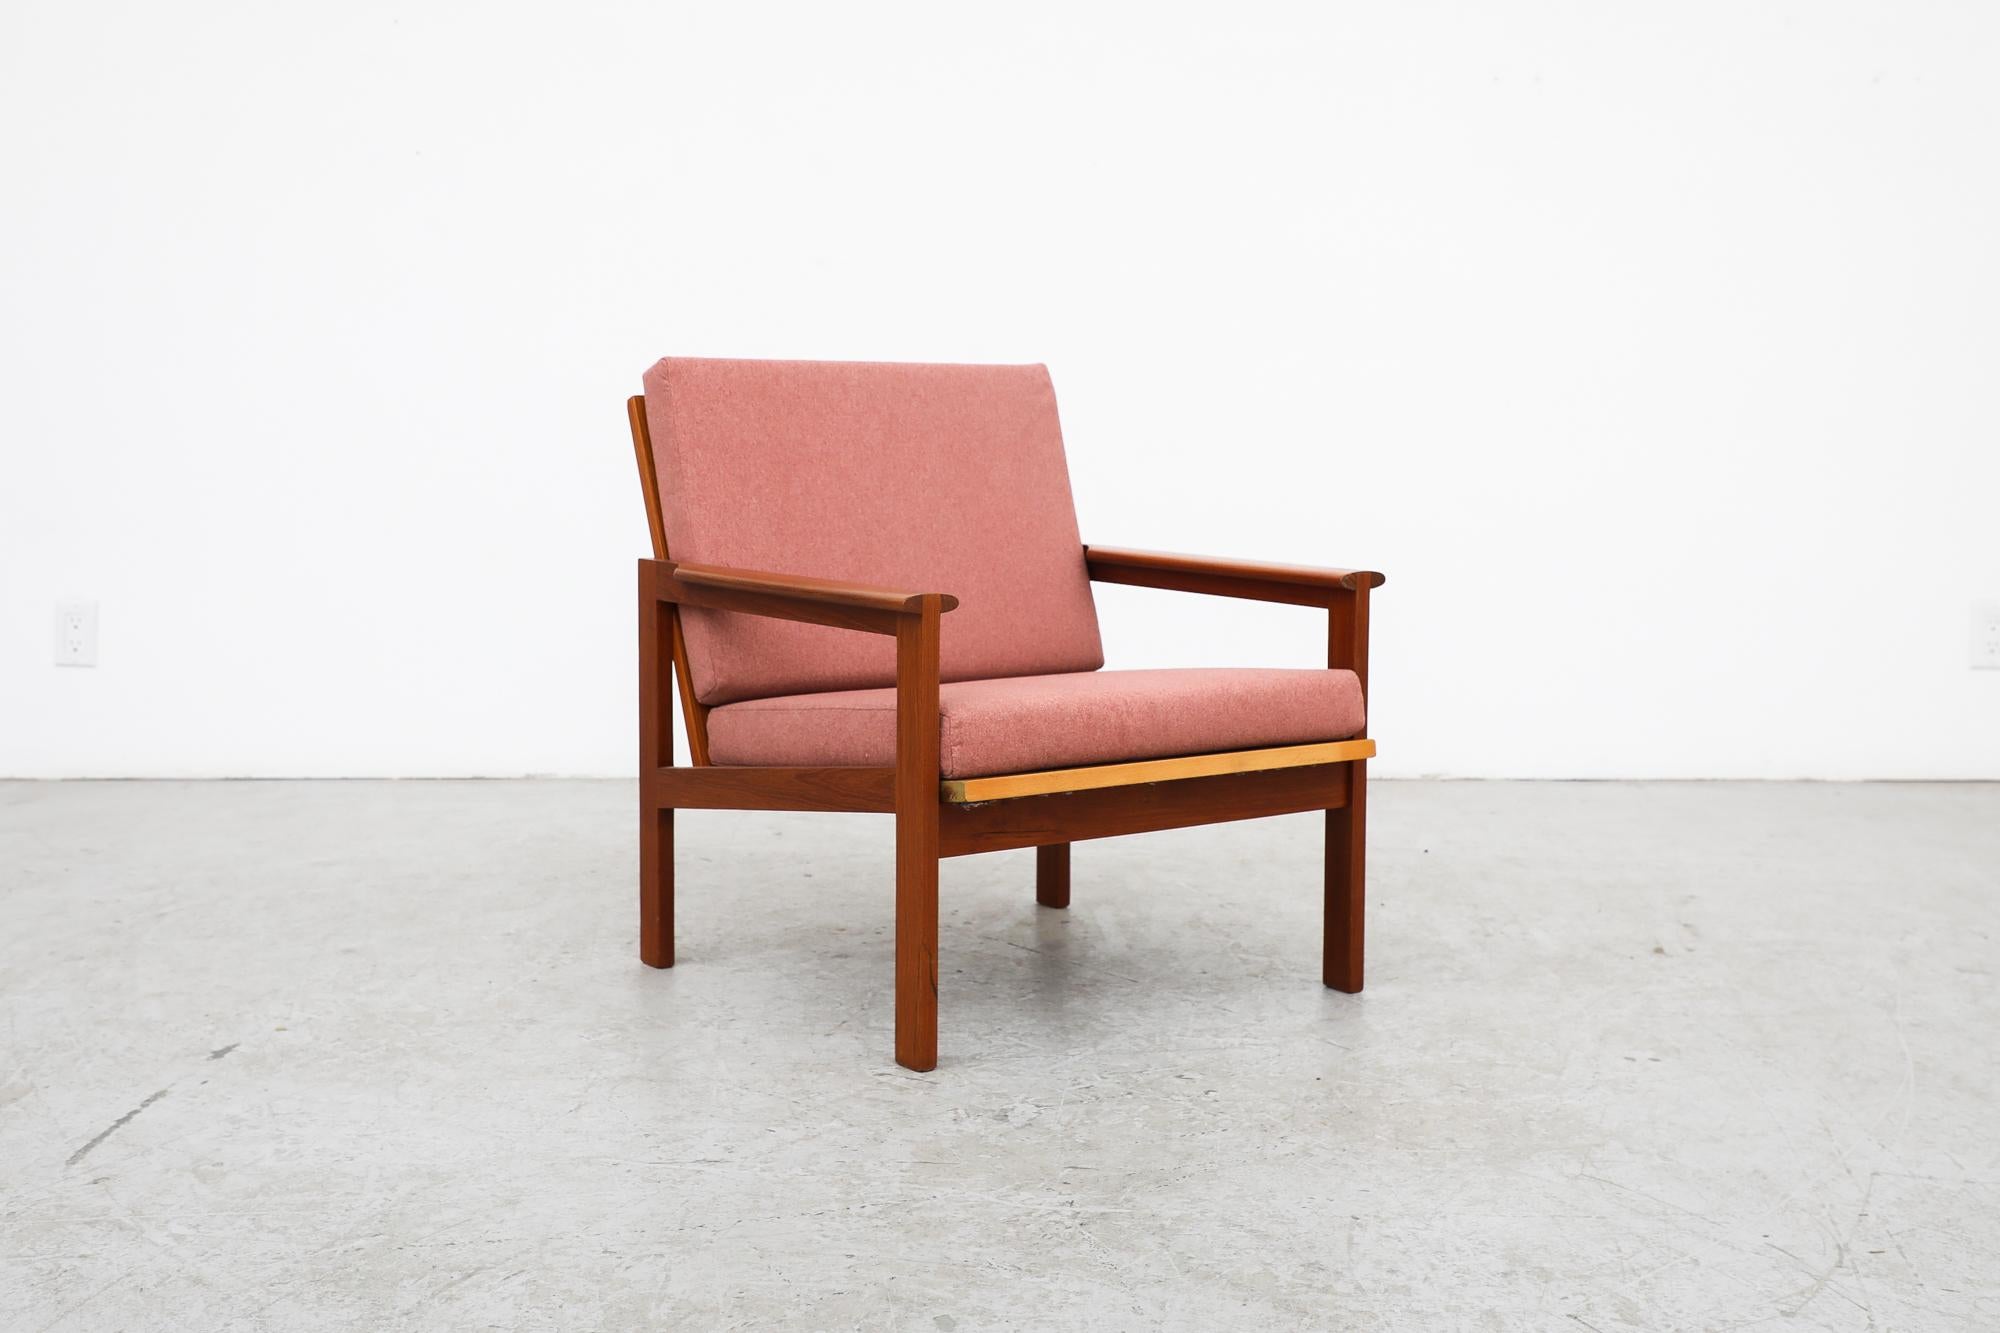 1960's Danish Mid-Century pink upholstered lounge chair by Illum Wikkelso for Niels Eilersen. In original condition with visible wear consistent with its age and use.